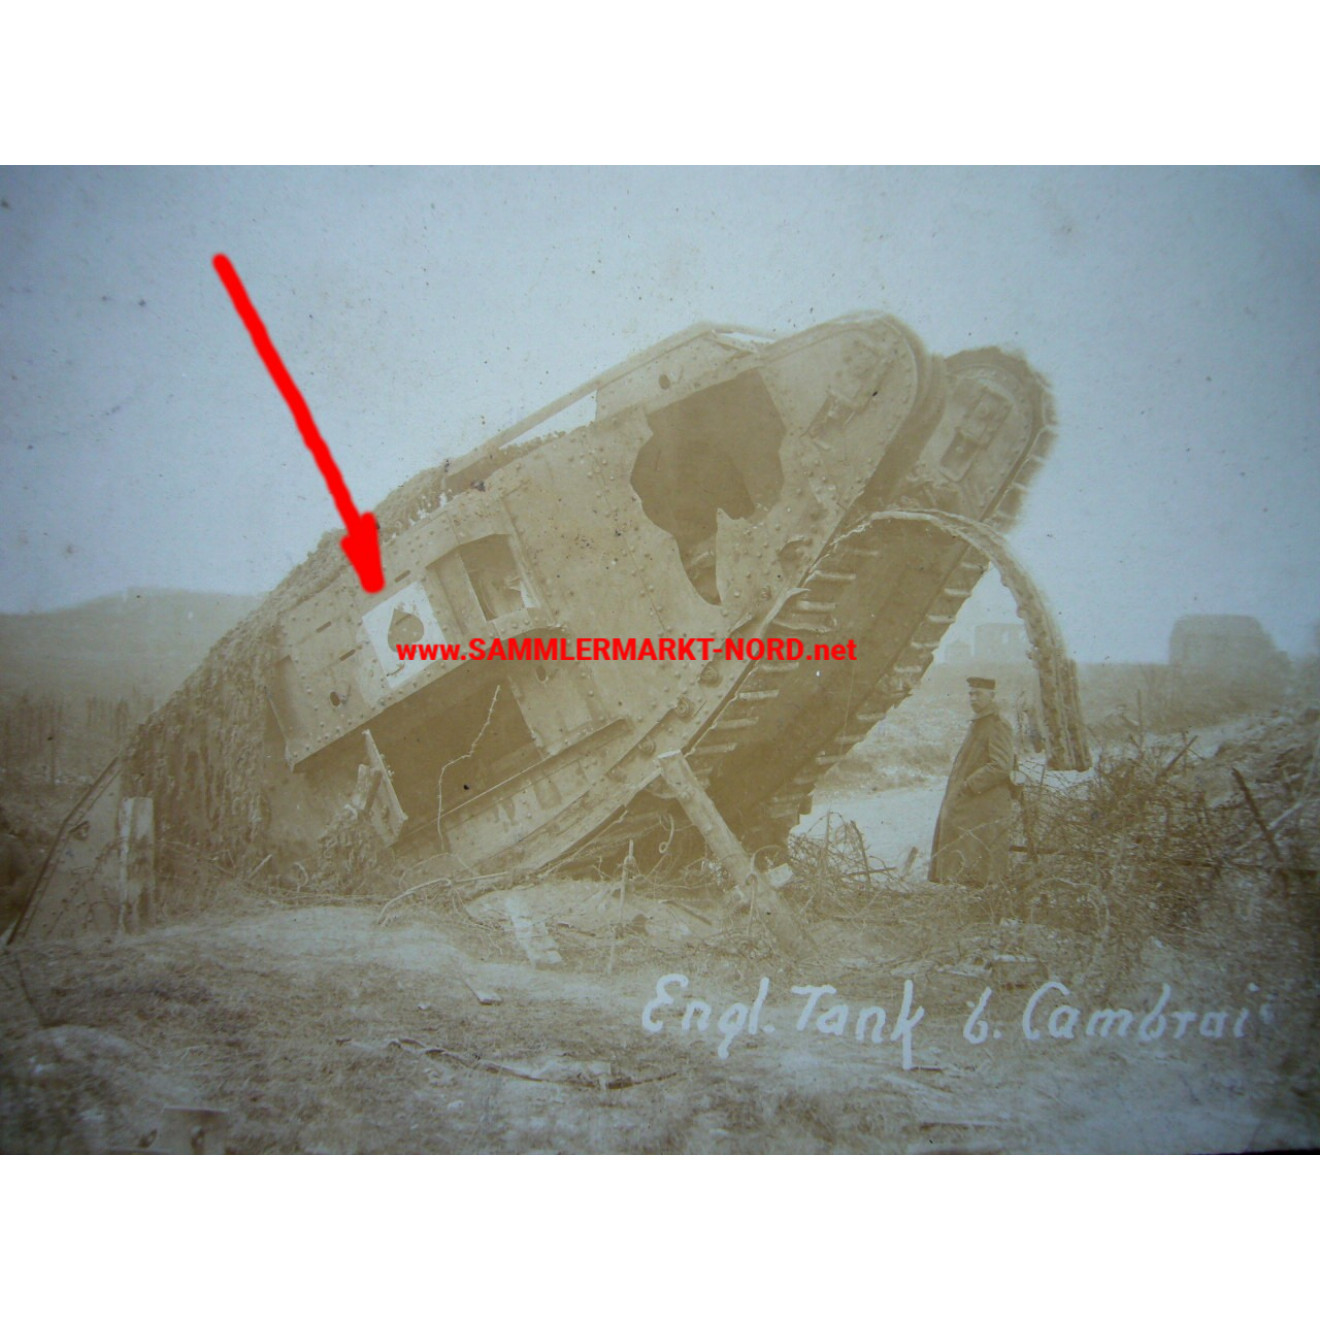 2 x photo 1918 near Cambrai (France) - destroyed British tank with insignia